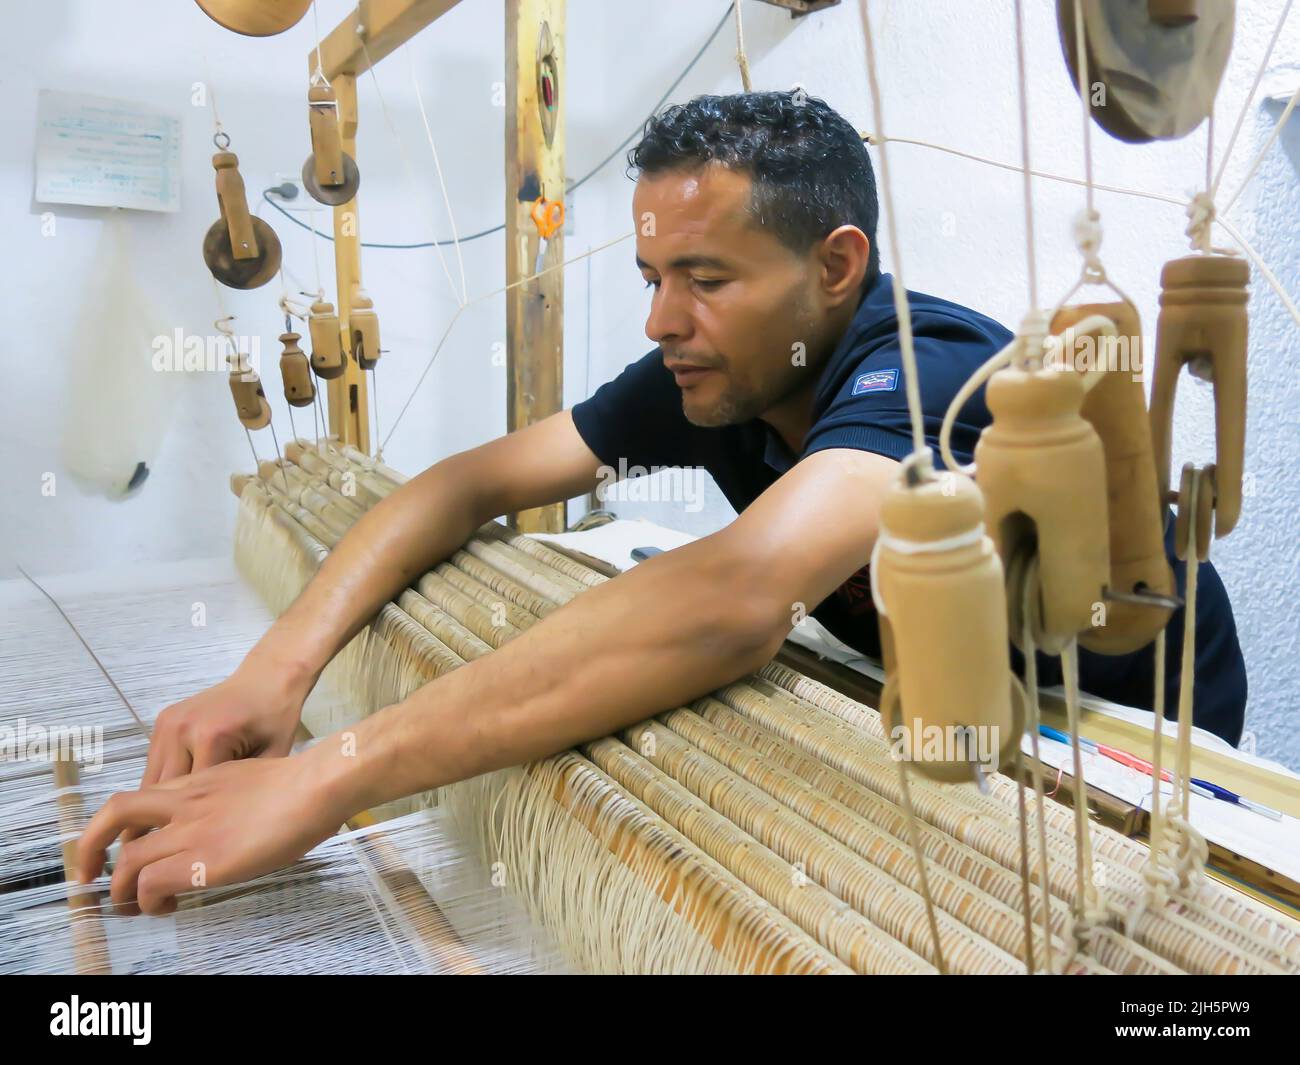 Demonstration - Weaving Cloth (Material) in Tunisia, North Africa Stock Photo